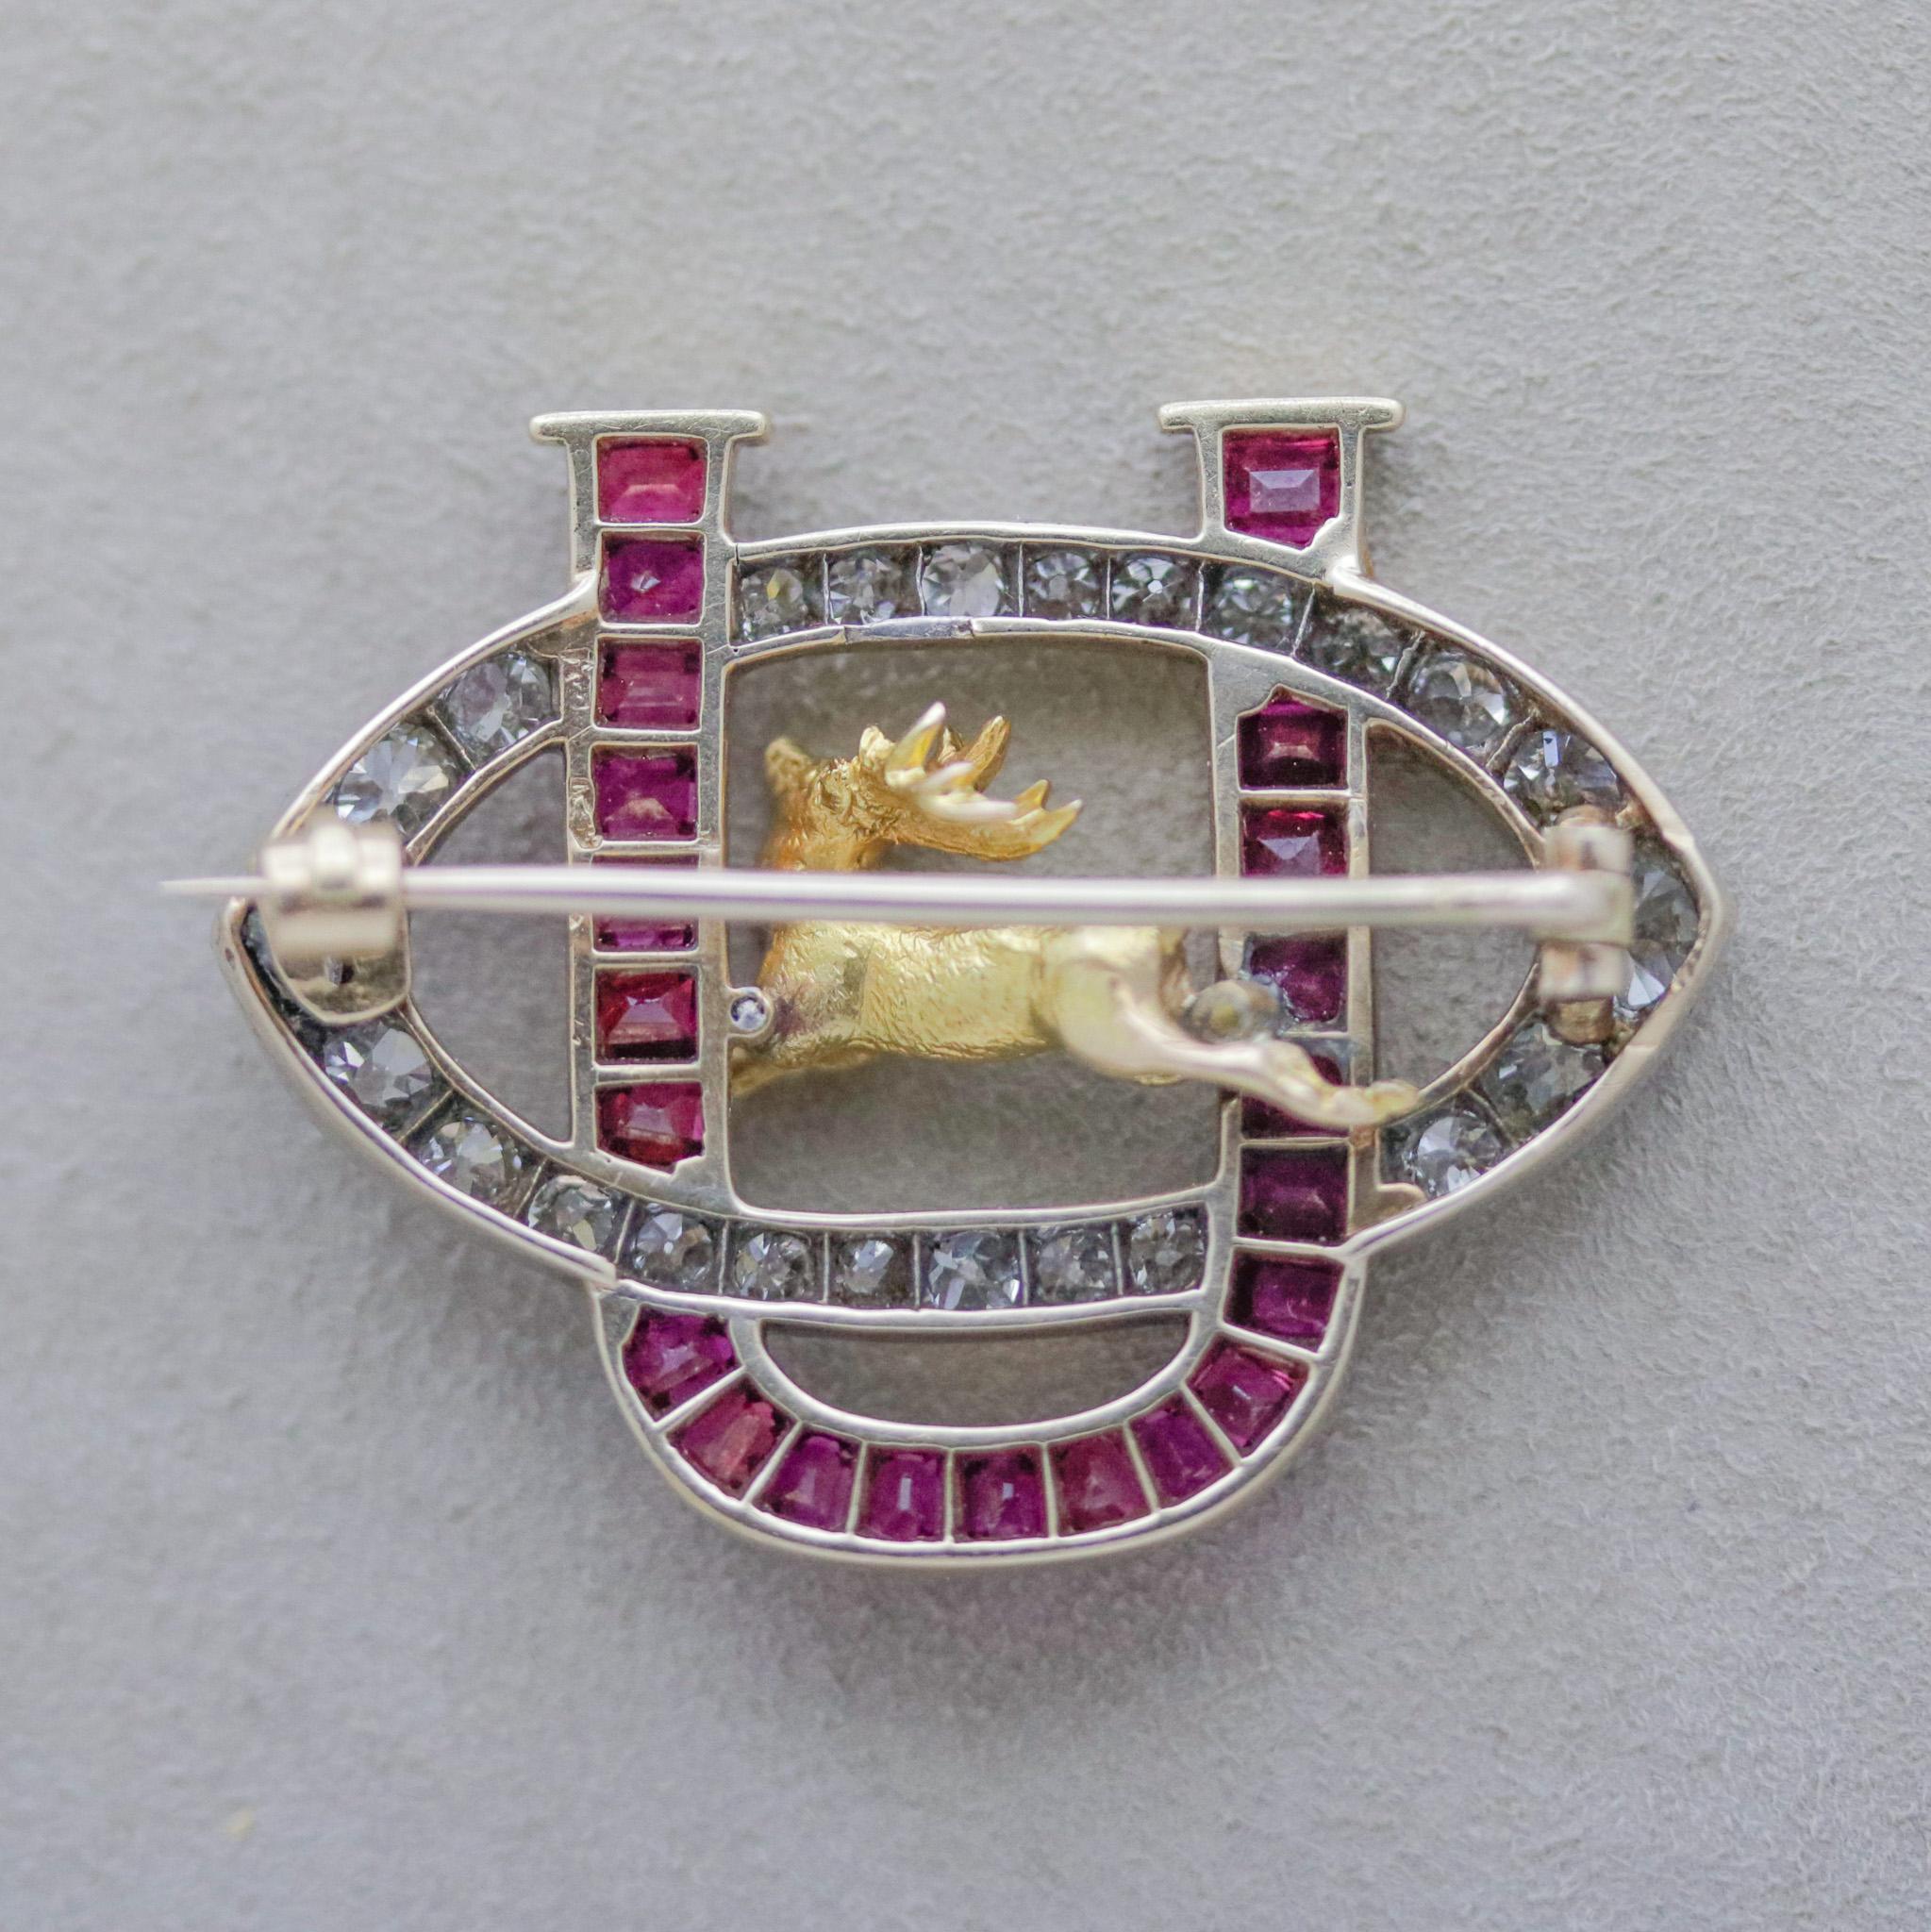 A stunning antique from the late 19th century featuring old European-cut diamonds and vivid red Burmese rubies! The rubies are set in a U shape while the diamonds are set in the opposite direction. In its center is a proud and strong gold stag, a